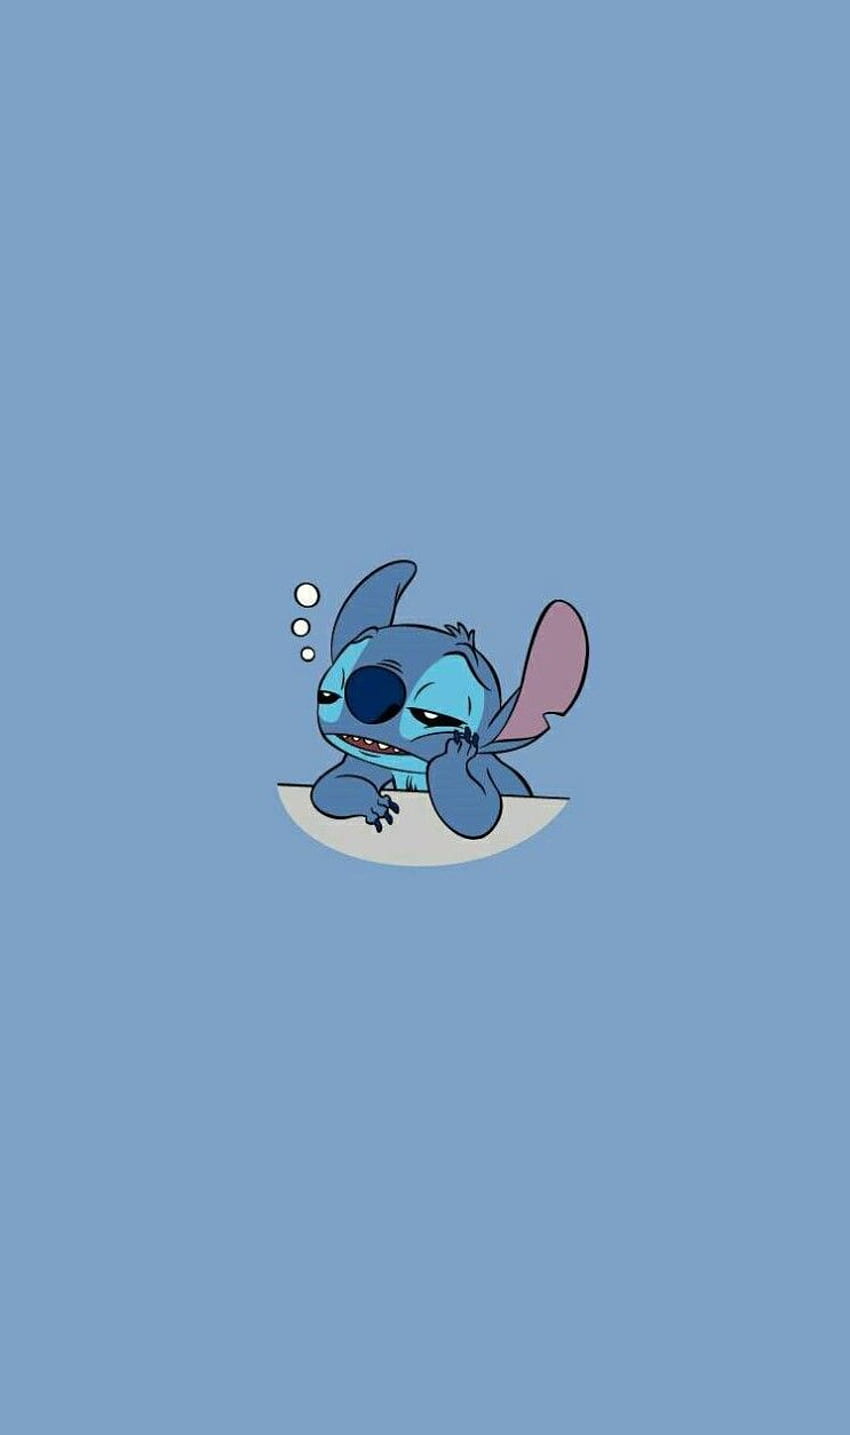 Cute Stitch Keypad Lock Screen  Wallpapers Apk Download for Android  Latest version 10 comhugobaforstitch